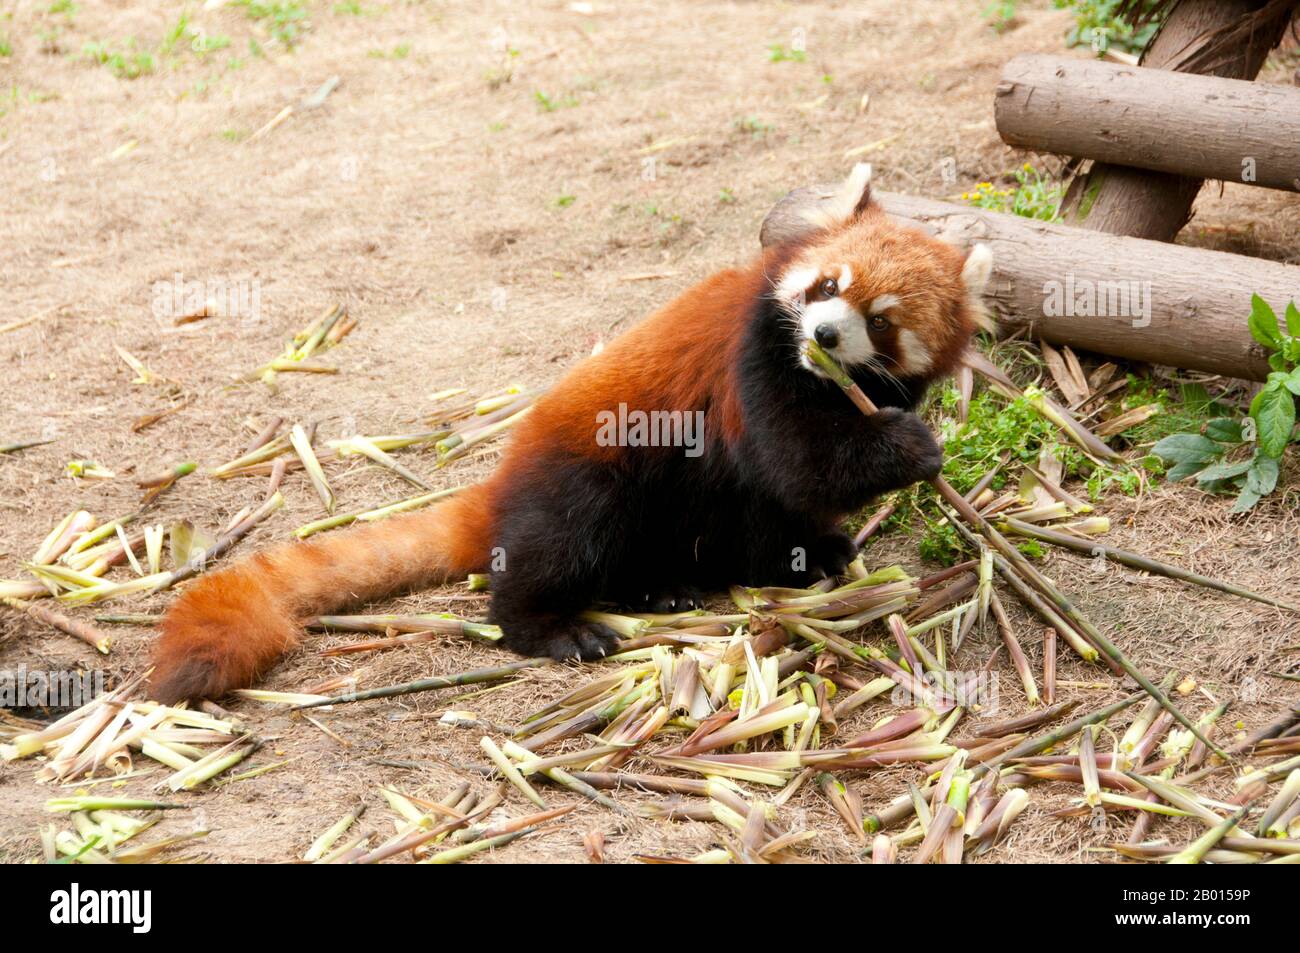 China: Red Panda or Lesser Panda, Giant Panda Breeding Research Base, Chengdu, Sichuan Province.  The red panda (Ailurus fulgens, or shining cat), is a small arboreal mammal native to the eastern Himalayas and southwestern China. It is the only species of the genus Ailurus. Slightly larger than a domestic cat, it has reddish-brown fur, a long, shaggy tail, and a waddling gait due to its shorter front legs. It feeds mainly on bamboo, but is omnivorous and may also eat eggs, birds, insects, and small mammals. It is a solitary animal, mainly active from dusk to dawn. Stock Photo